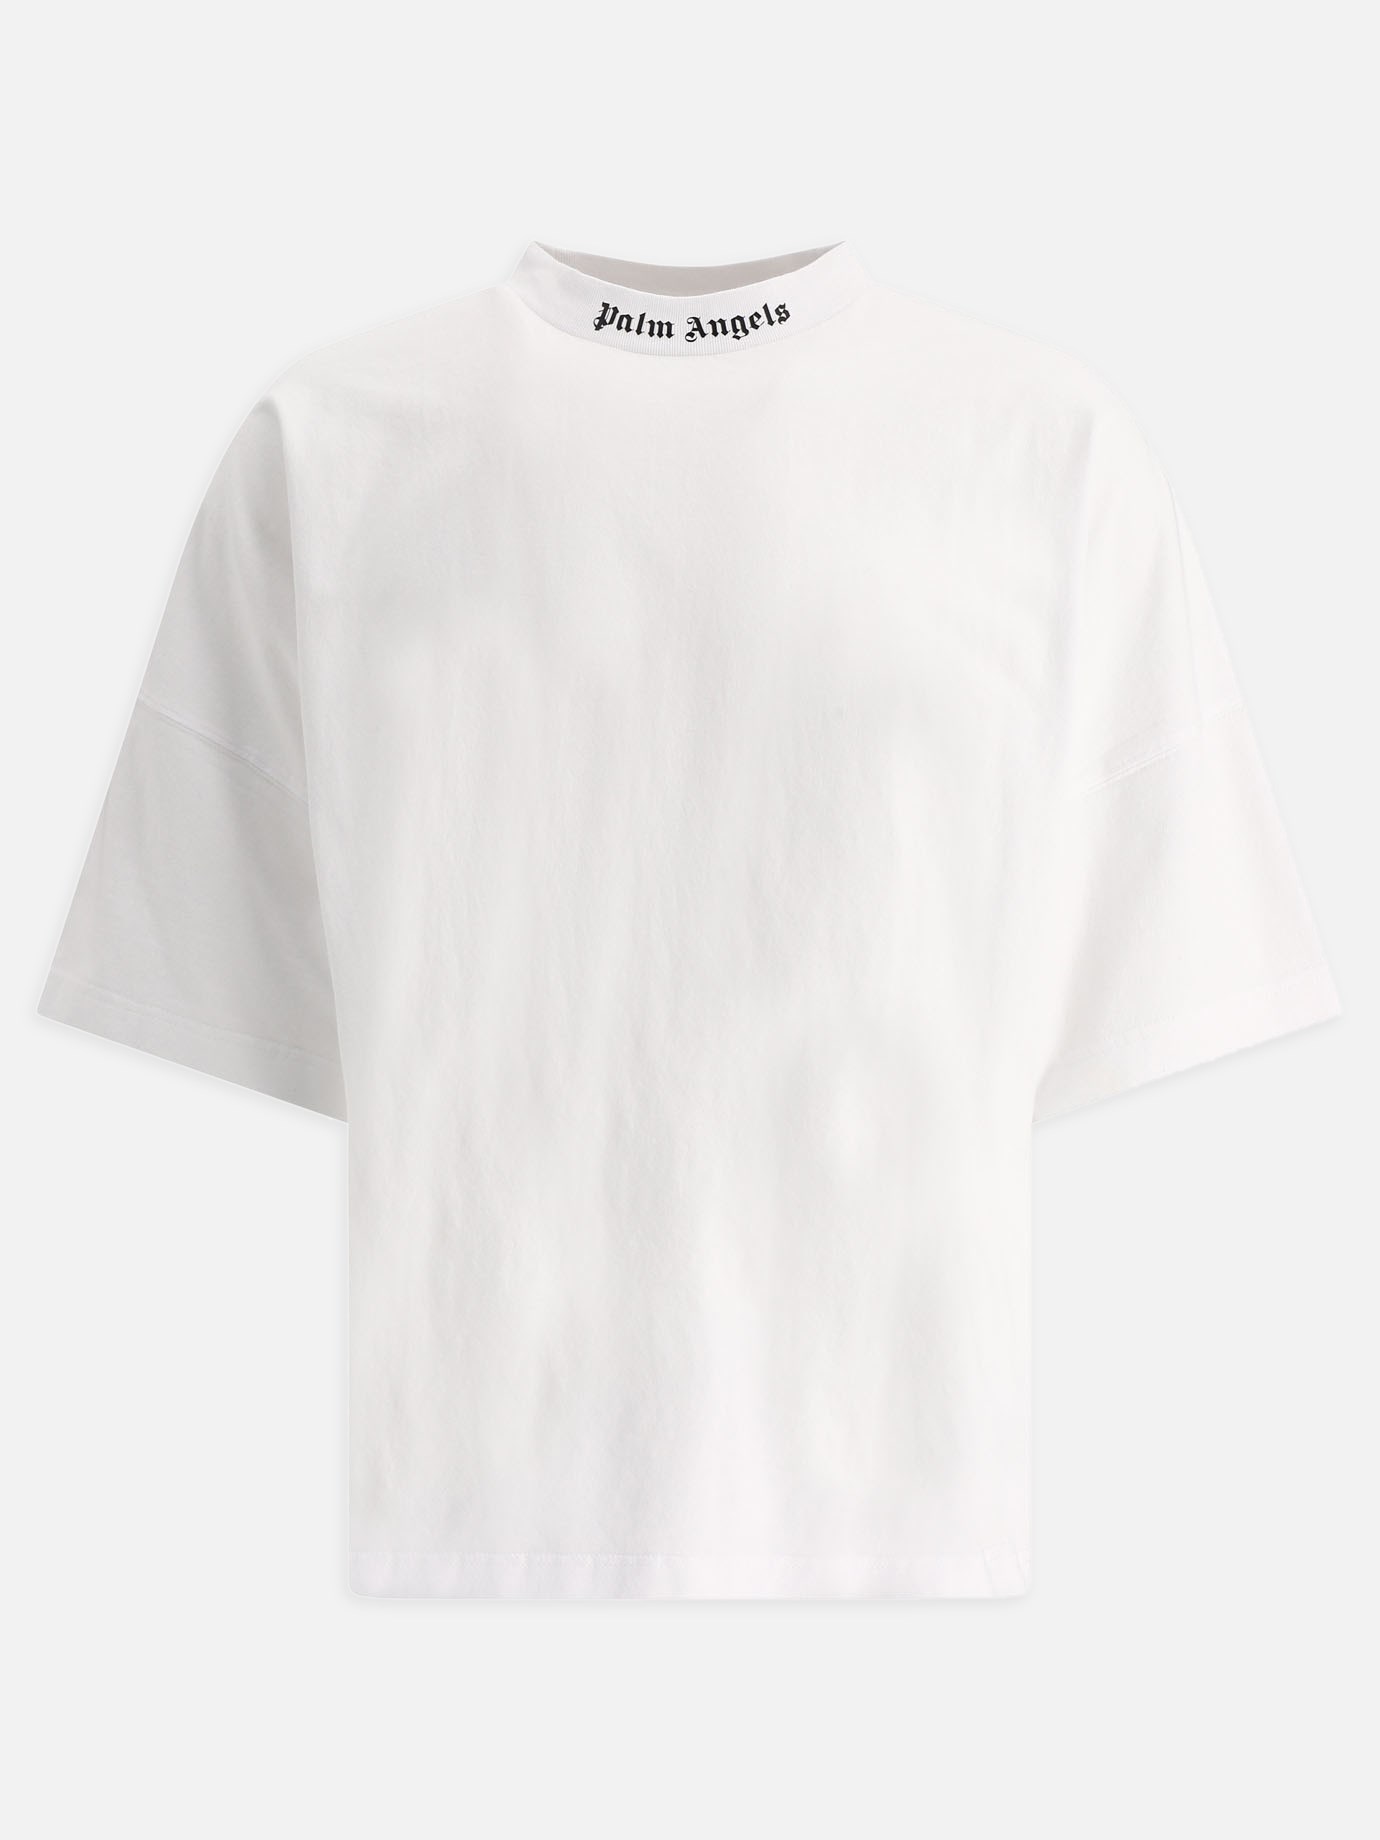  Classic Logo  t-shirt by Palm Angels